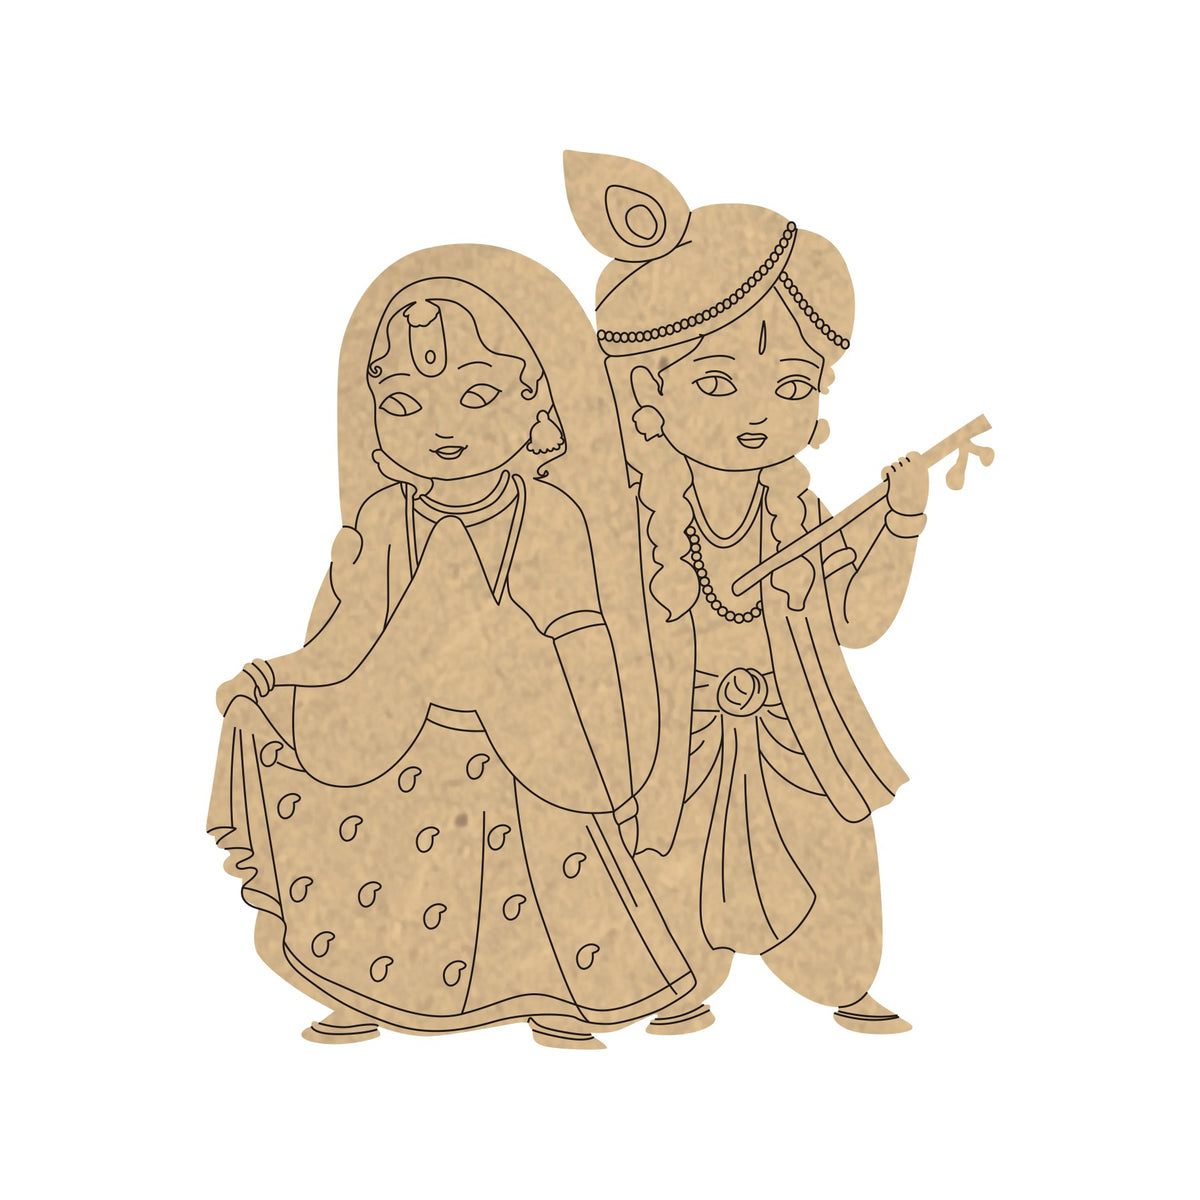 PAPERICIOUS 4mm thick Pre Marked MDF Base Bal Radha Krishna